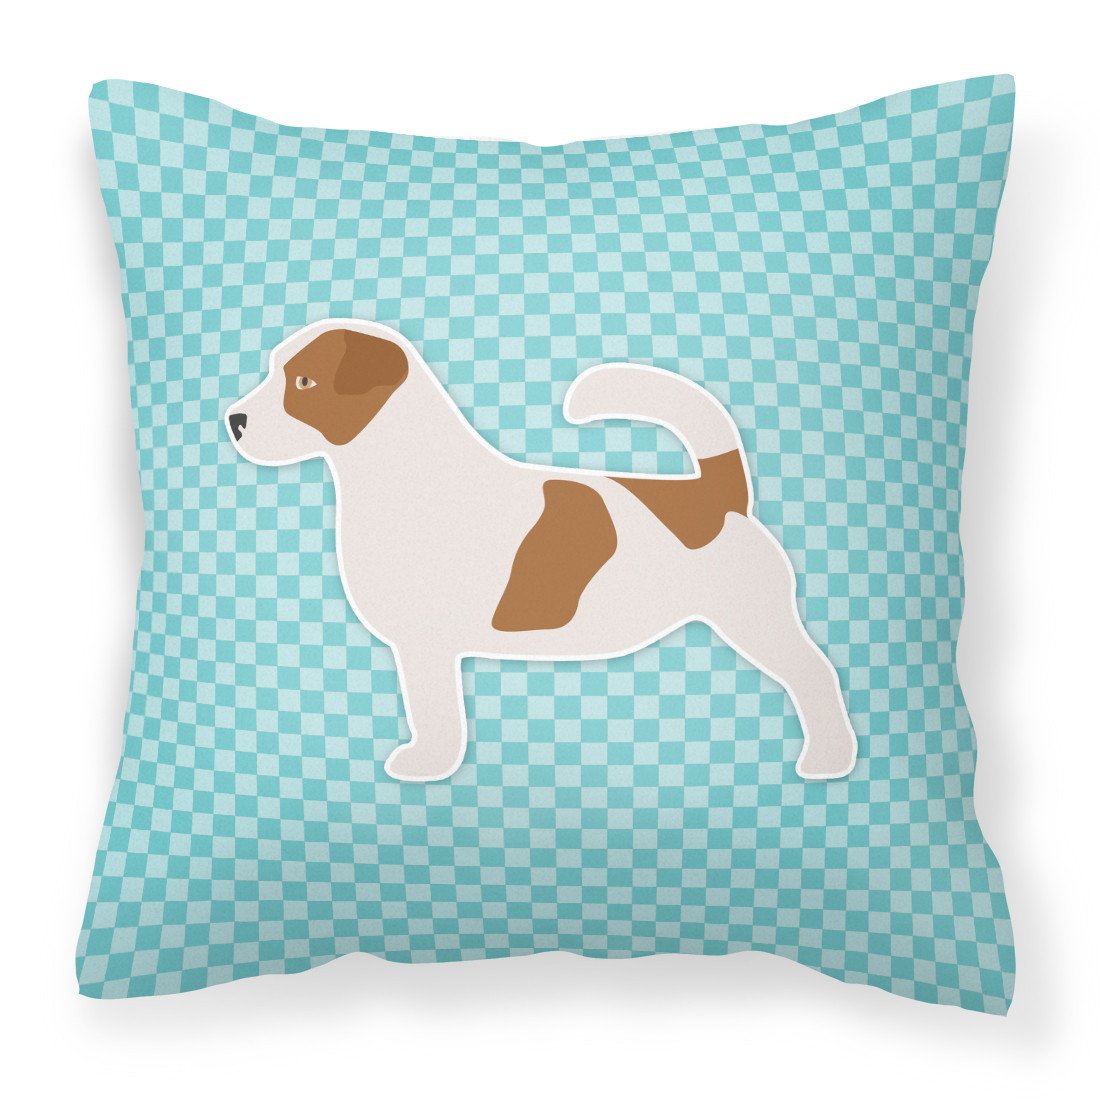 Jack Russell Terrier  Checkerboard Blue Fabric Decorative Pillow BB3707PW1818 by Caroline's Treasures